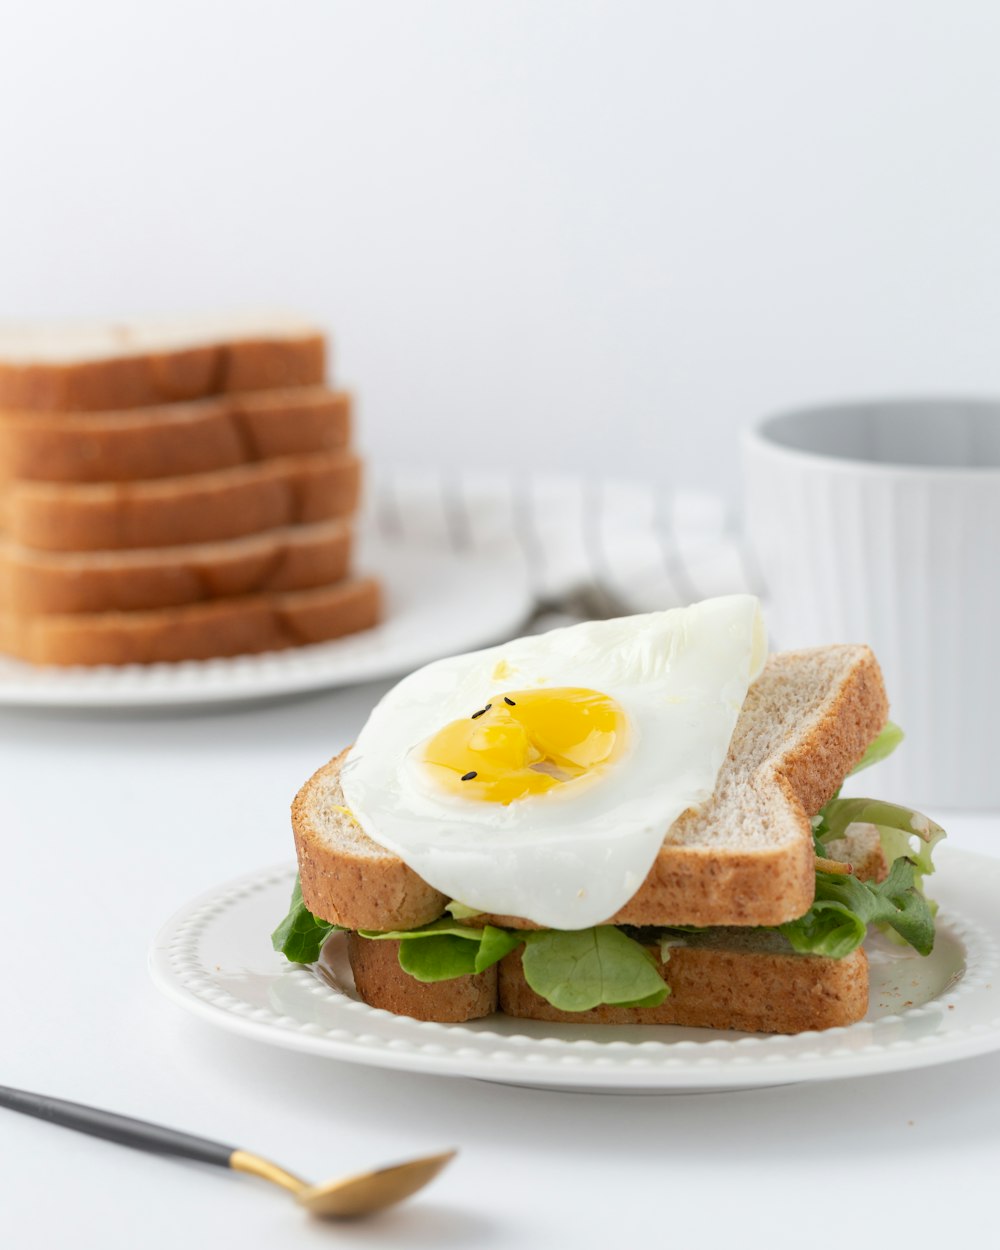 leaf vegetable with bread and egg